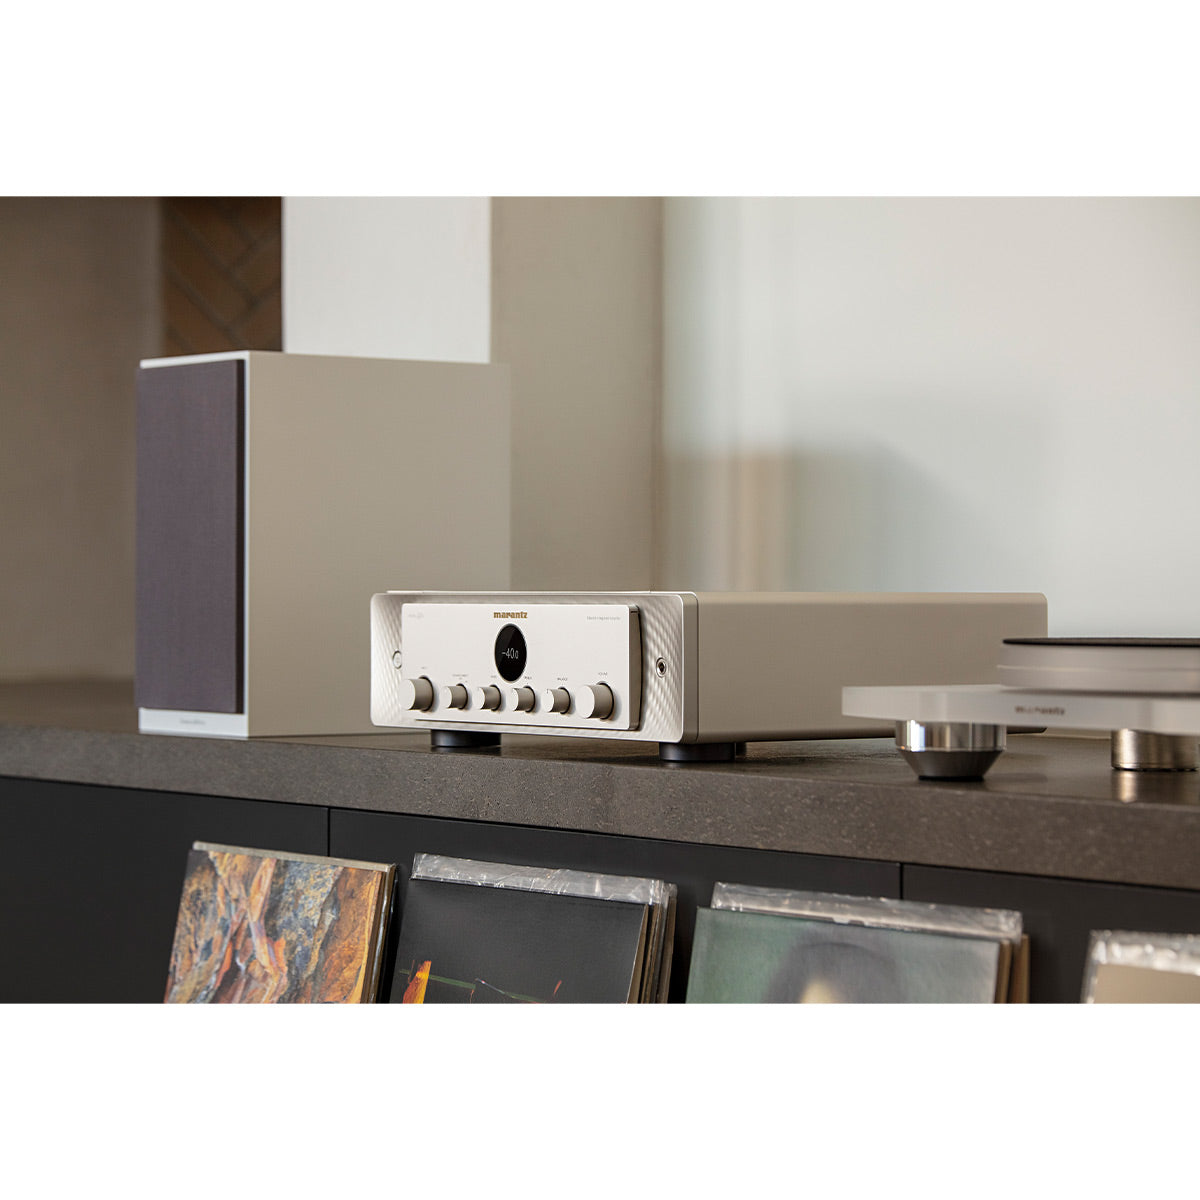 Marantz MODEL 40n Integrated Stereo Amplifier with Streaming Built-In (Silver Gold)